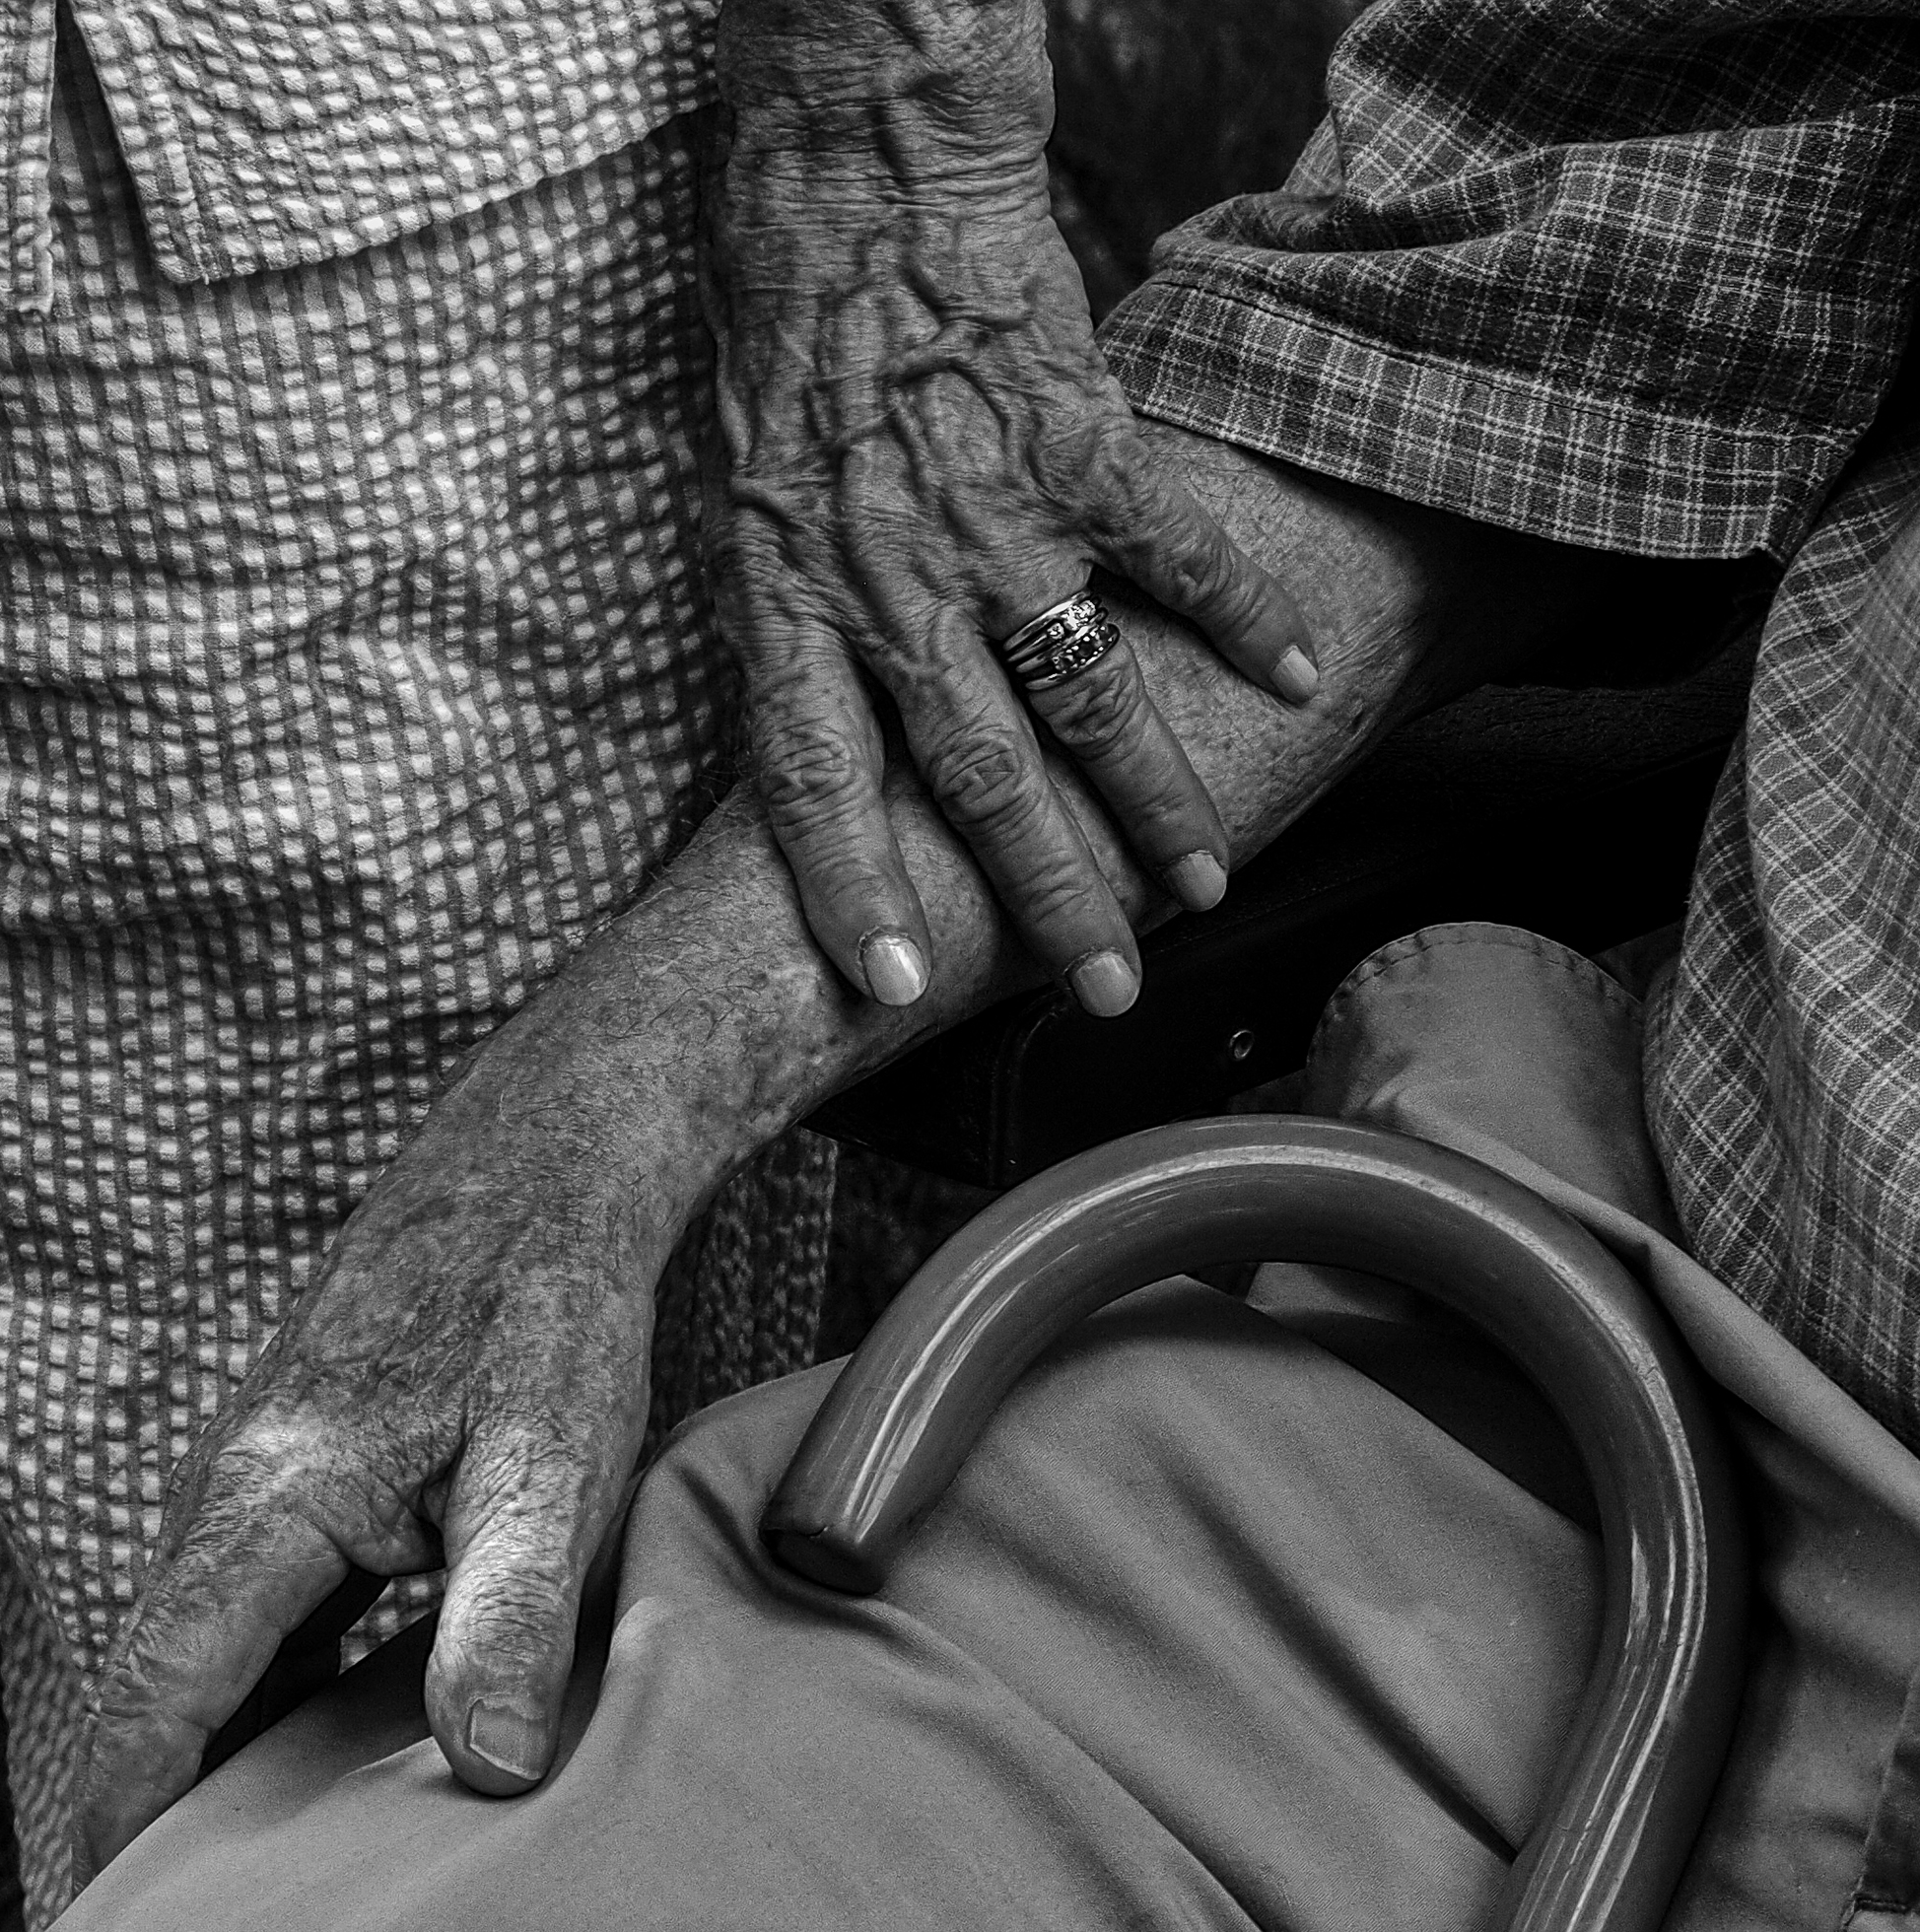 An old woman’s hand rests upon an old man’s forearm as she stands above him. He is seated with a cane in his lap.